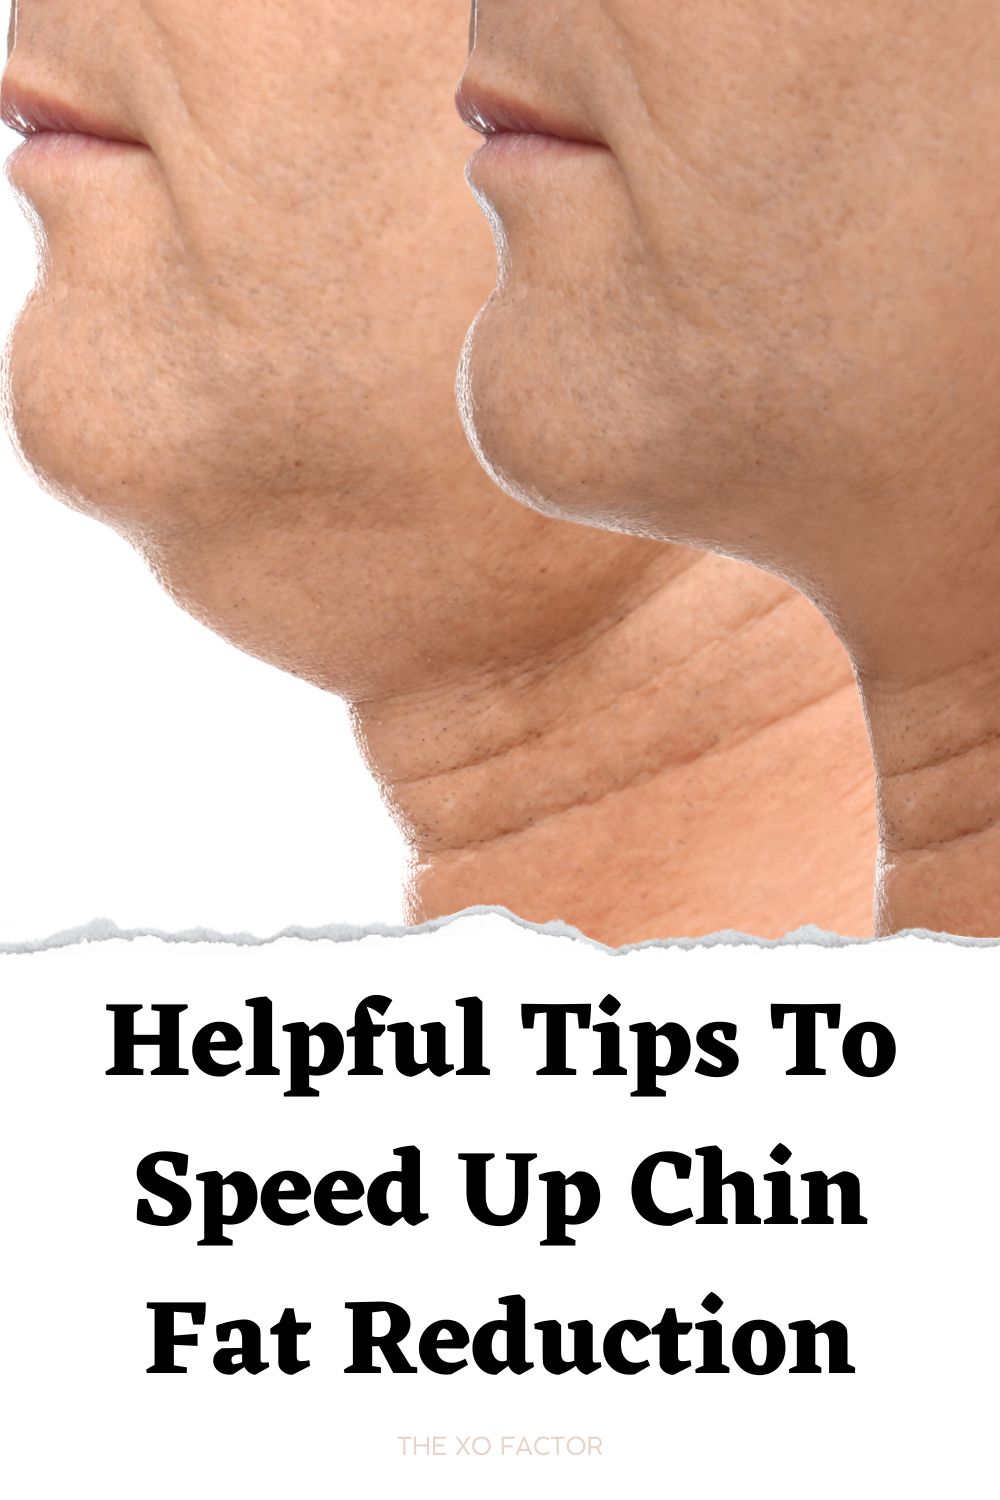 Helpful Tips To Speed Up Chin Fat Reduction